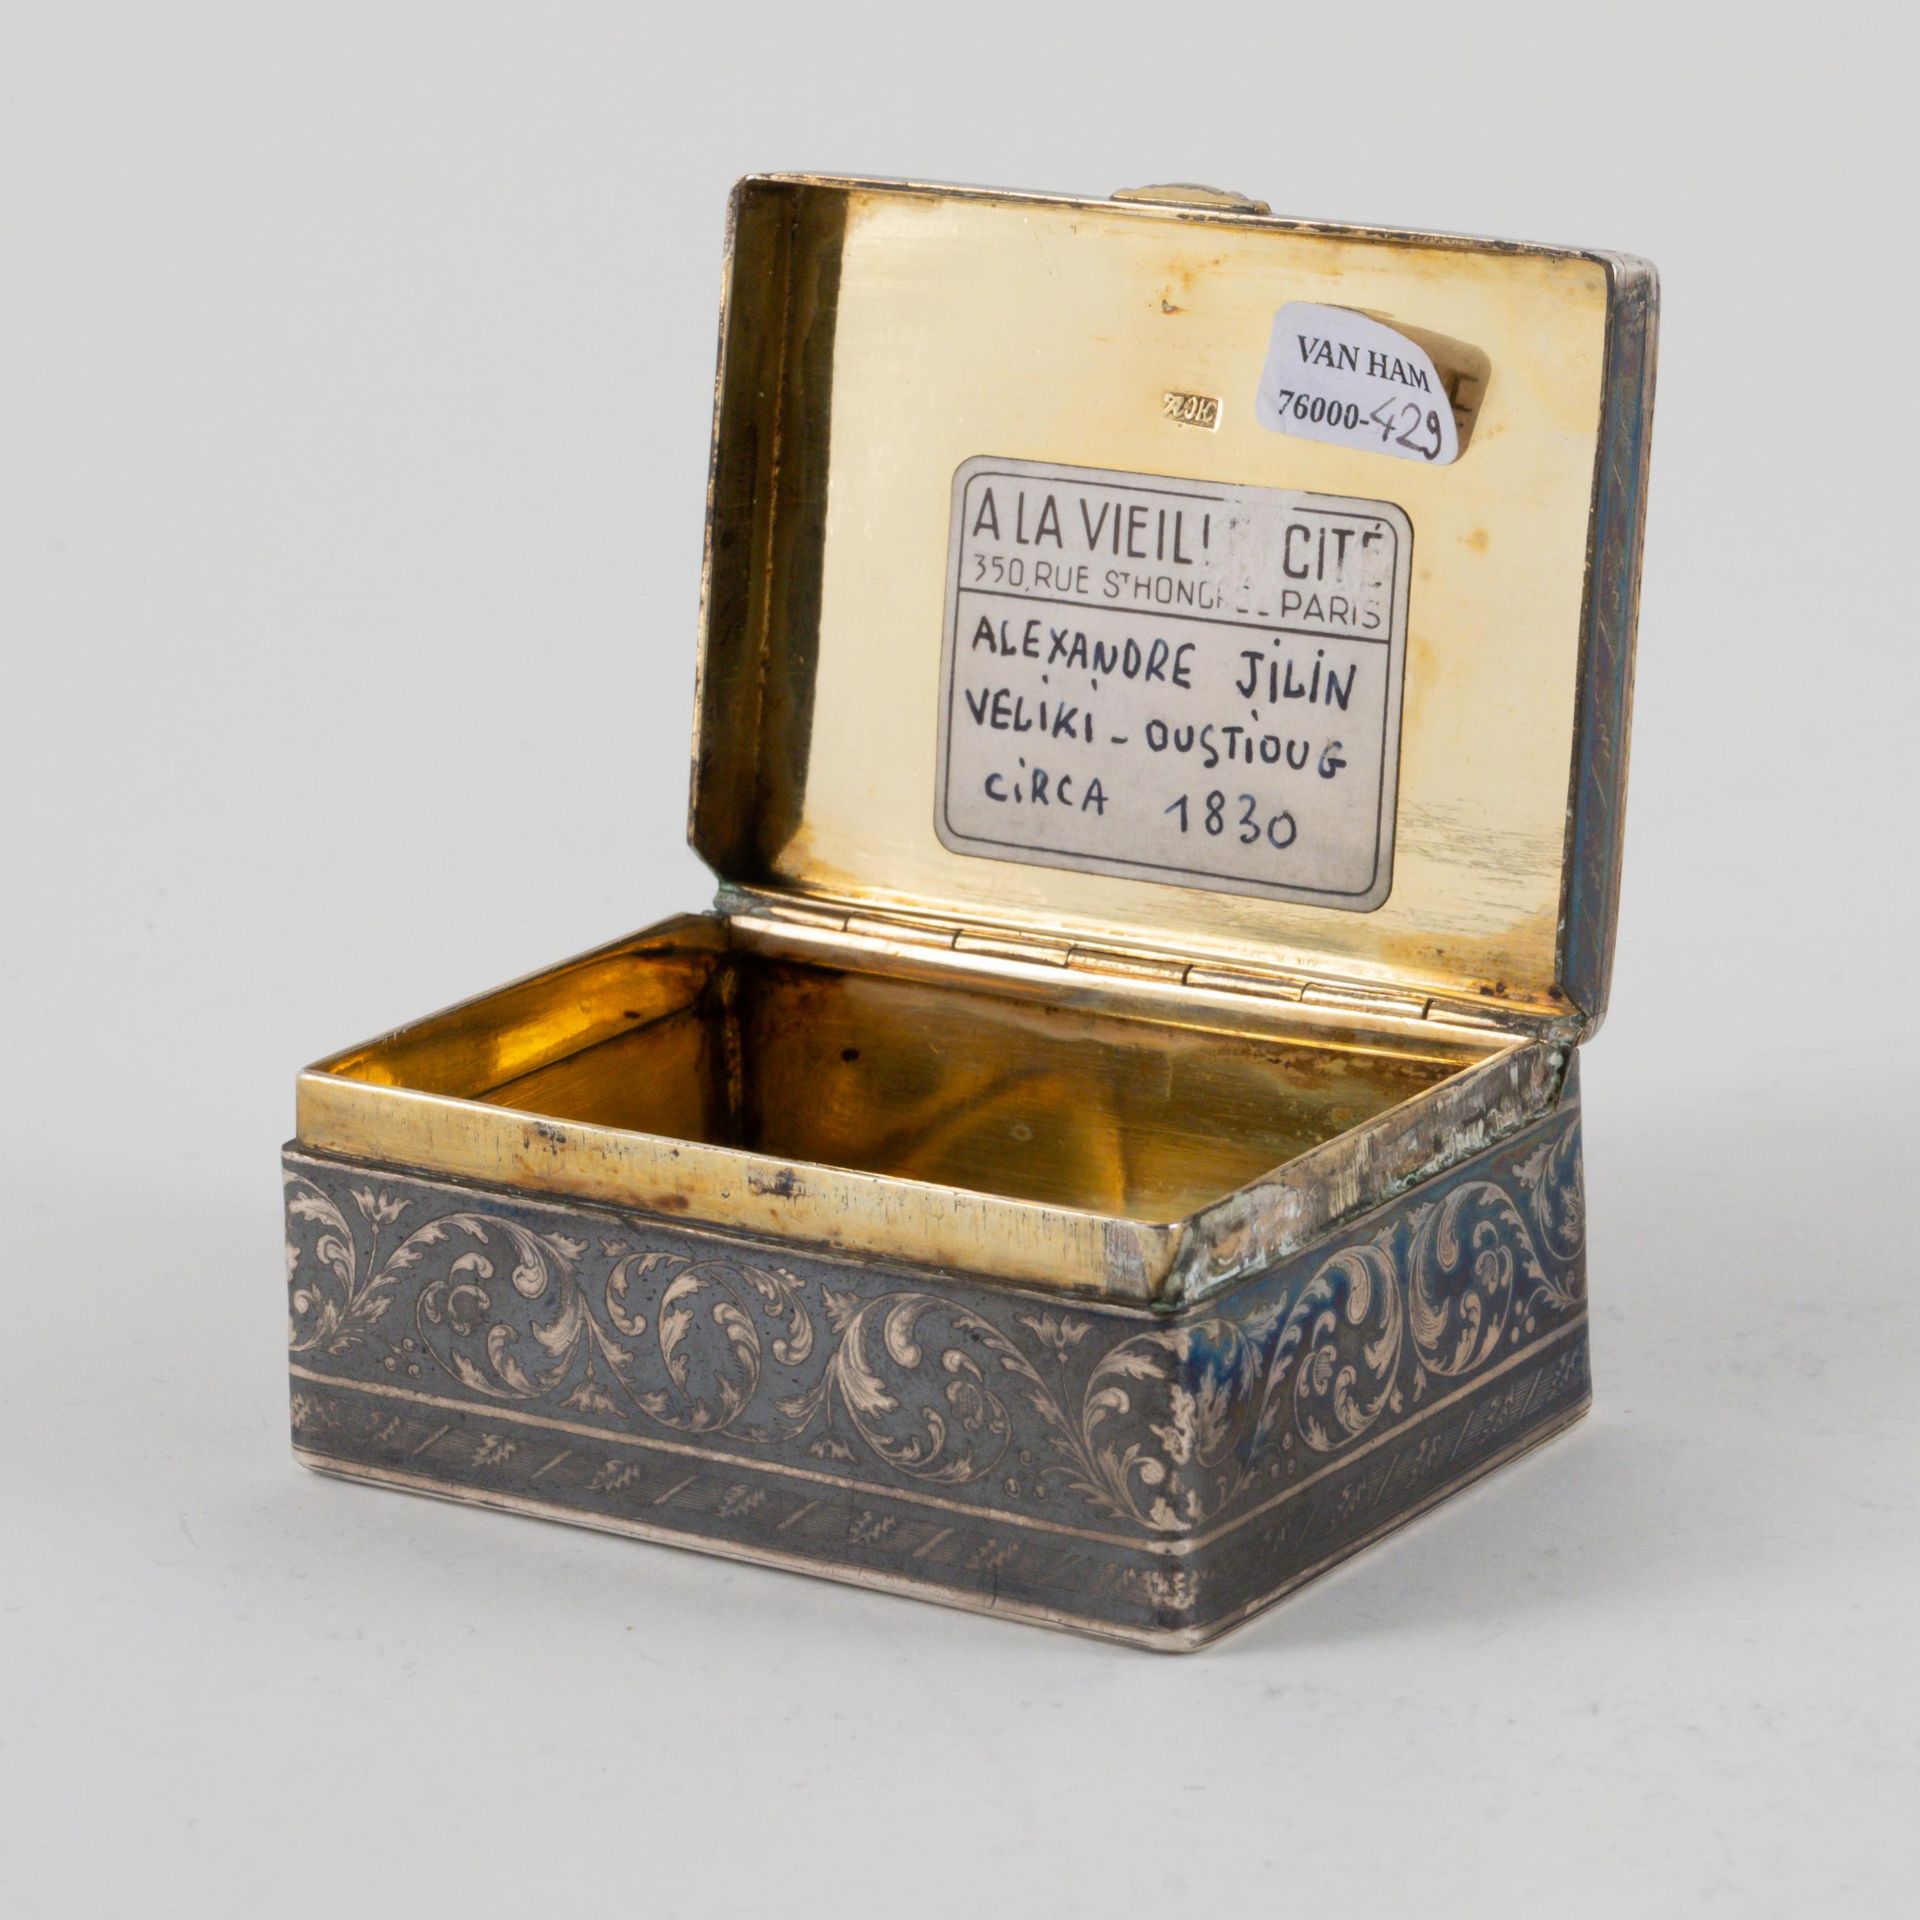 Snuff box with princely coat of arms and city map of Veliki Ustjug - Image 5 of 7